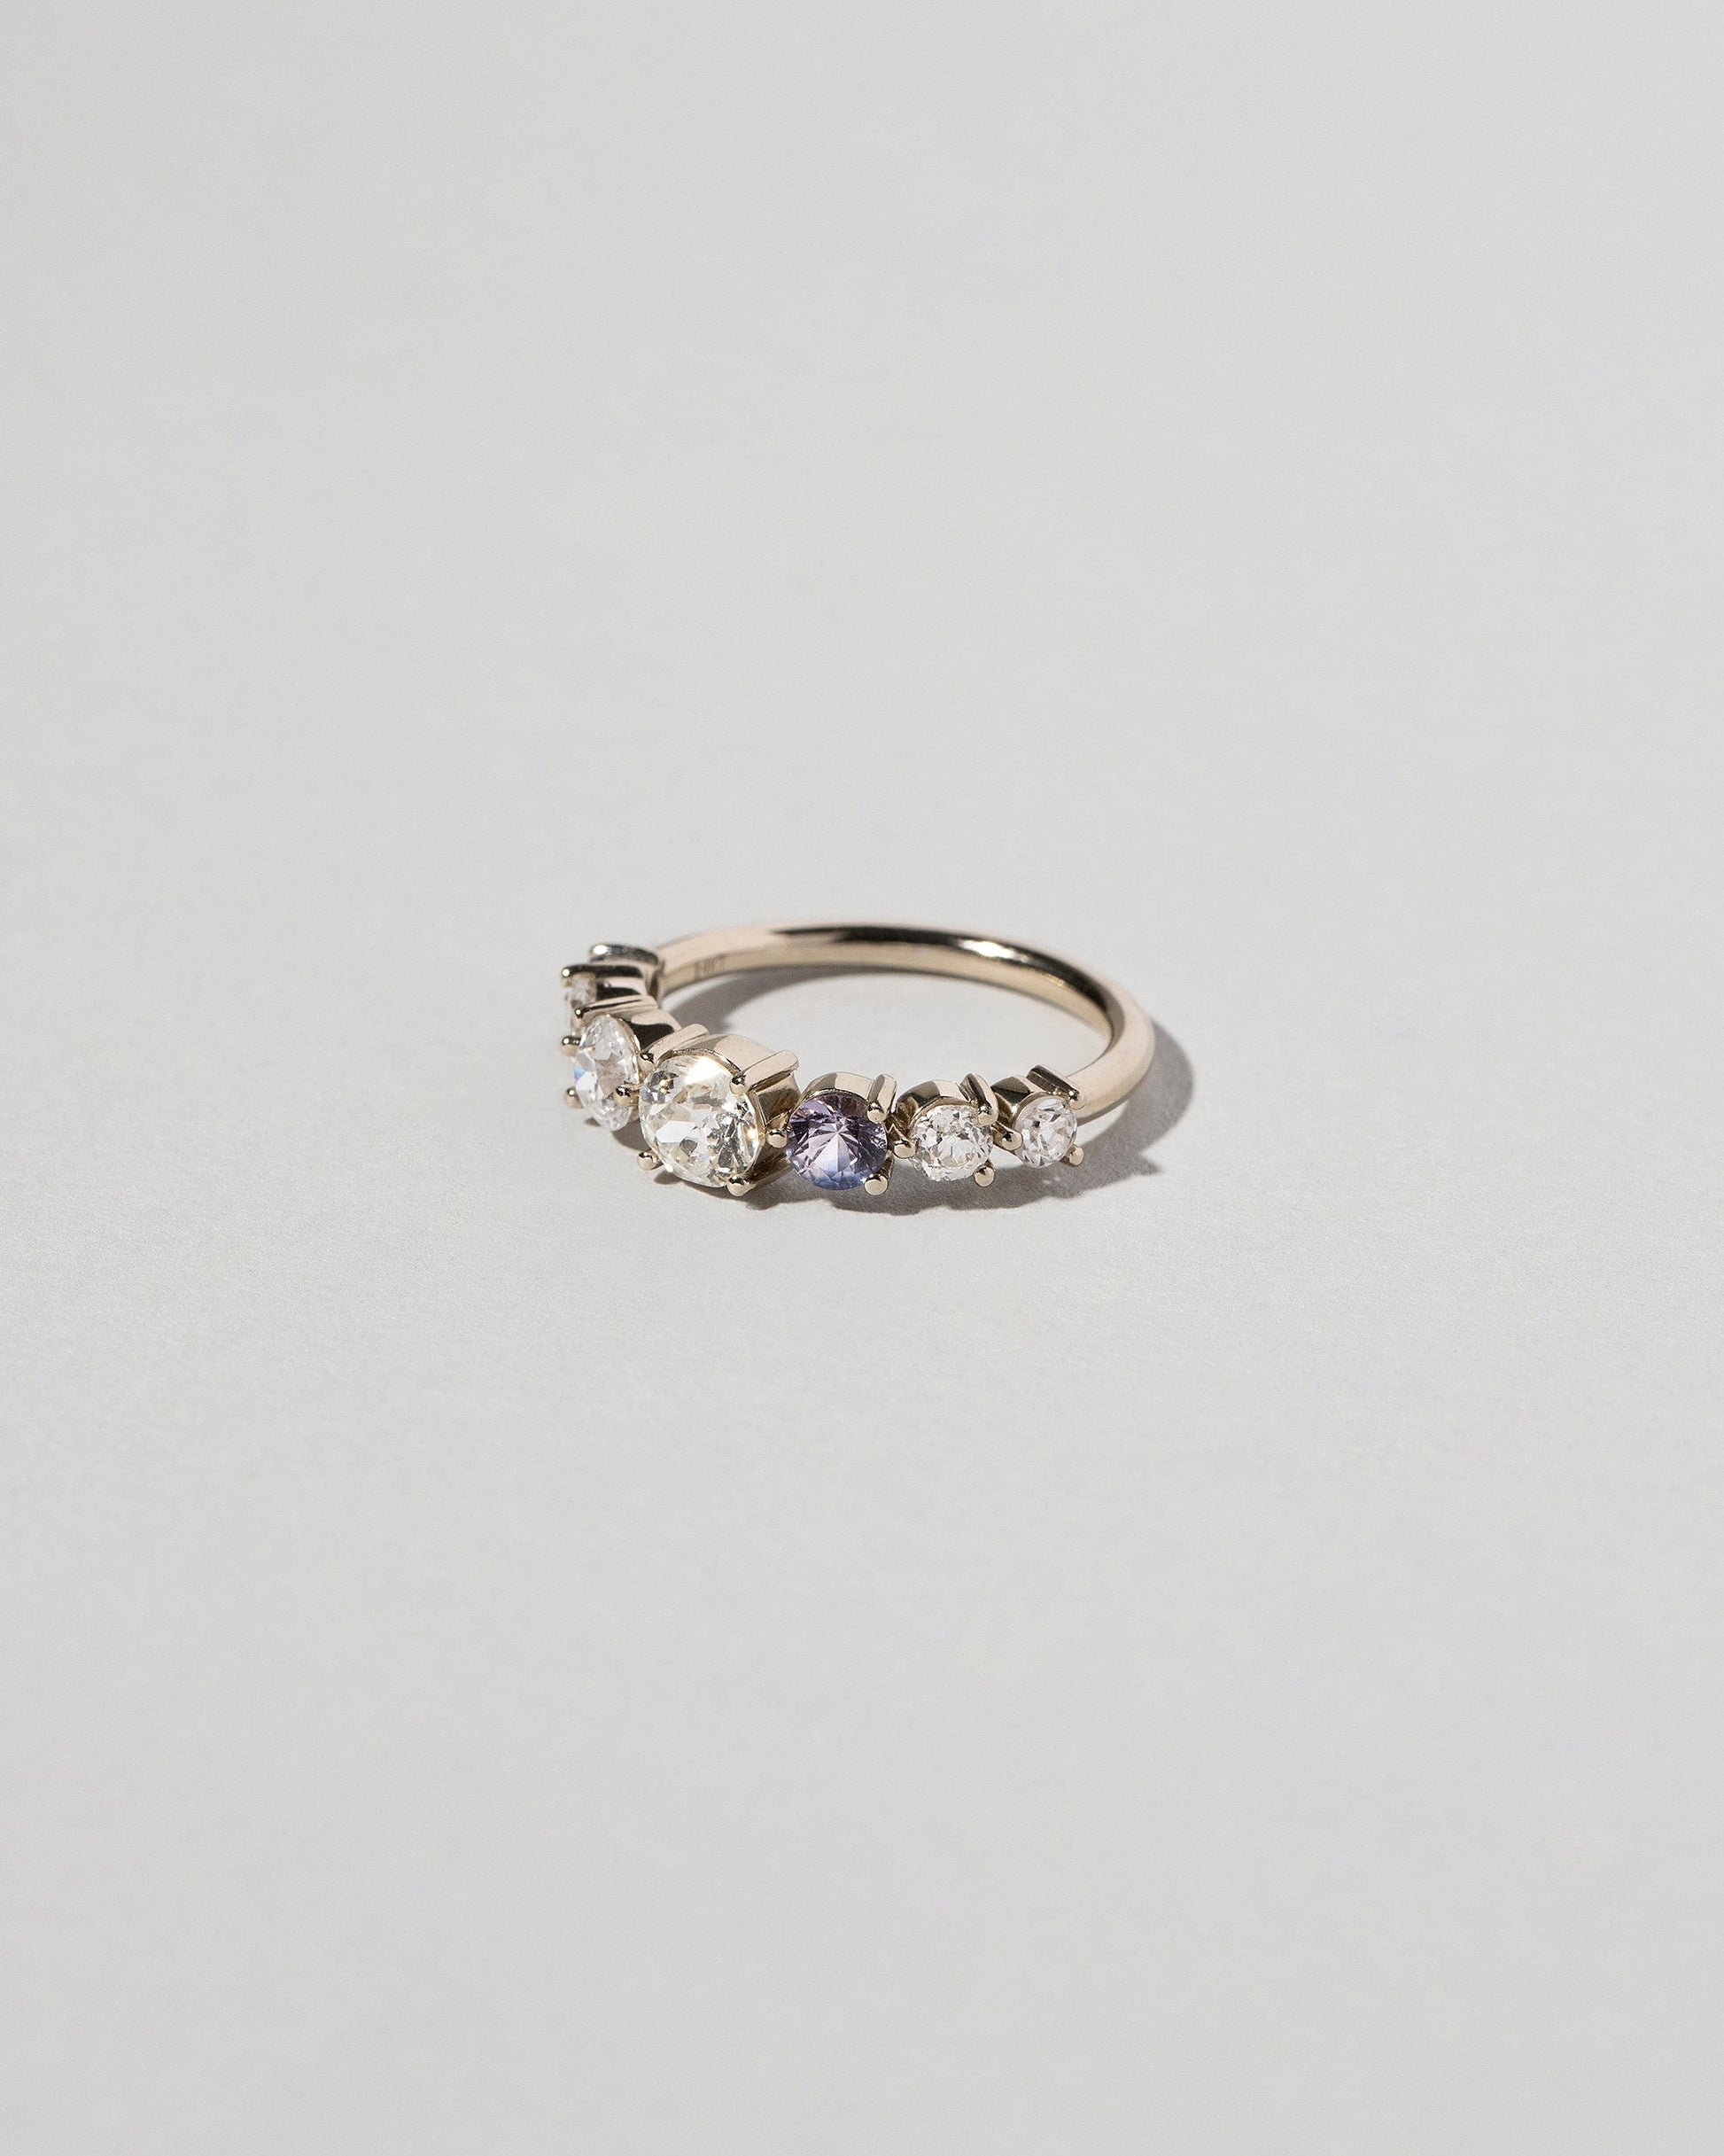  Diamond & Sapphire Line Cluster Ring on light color background.